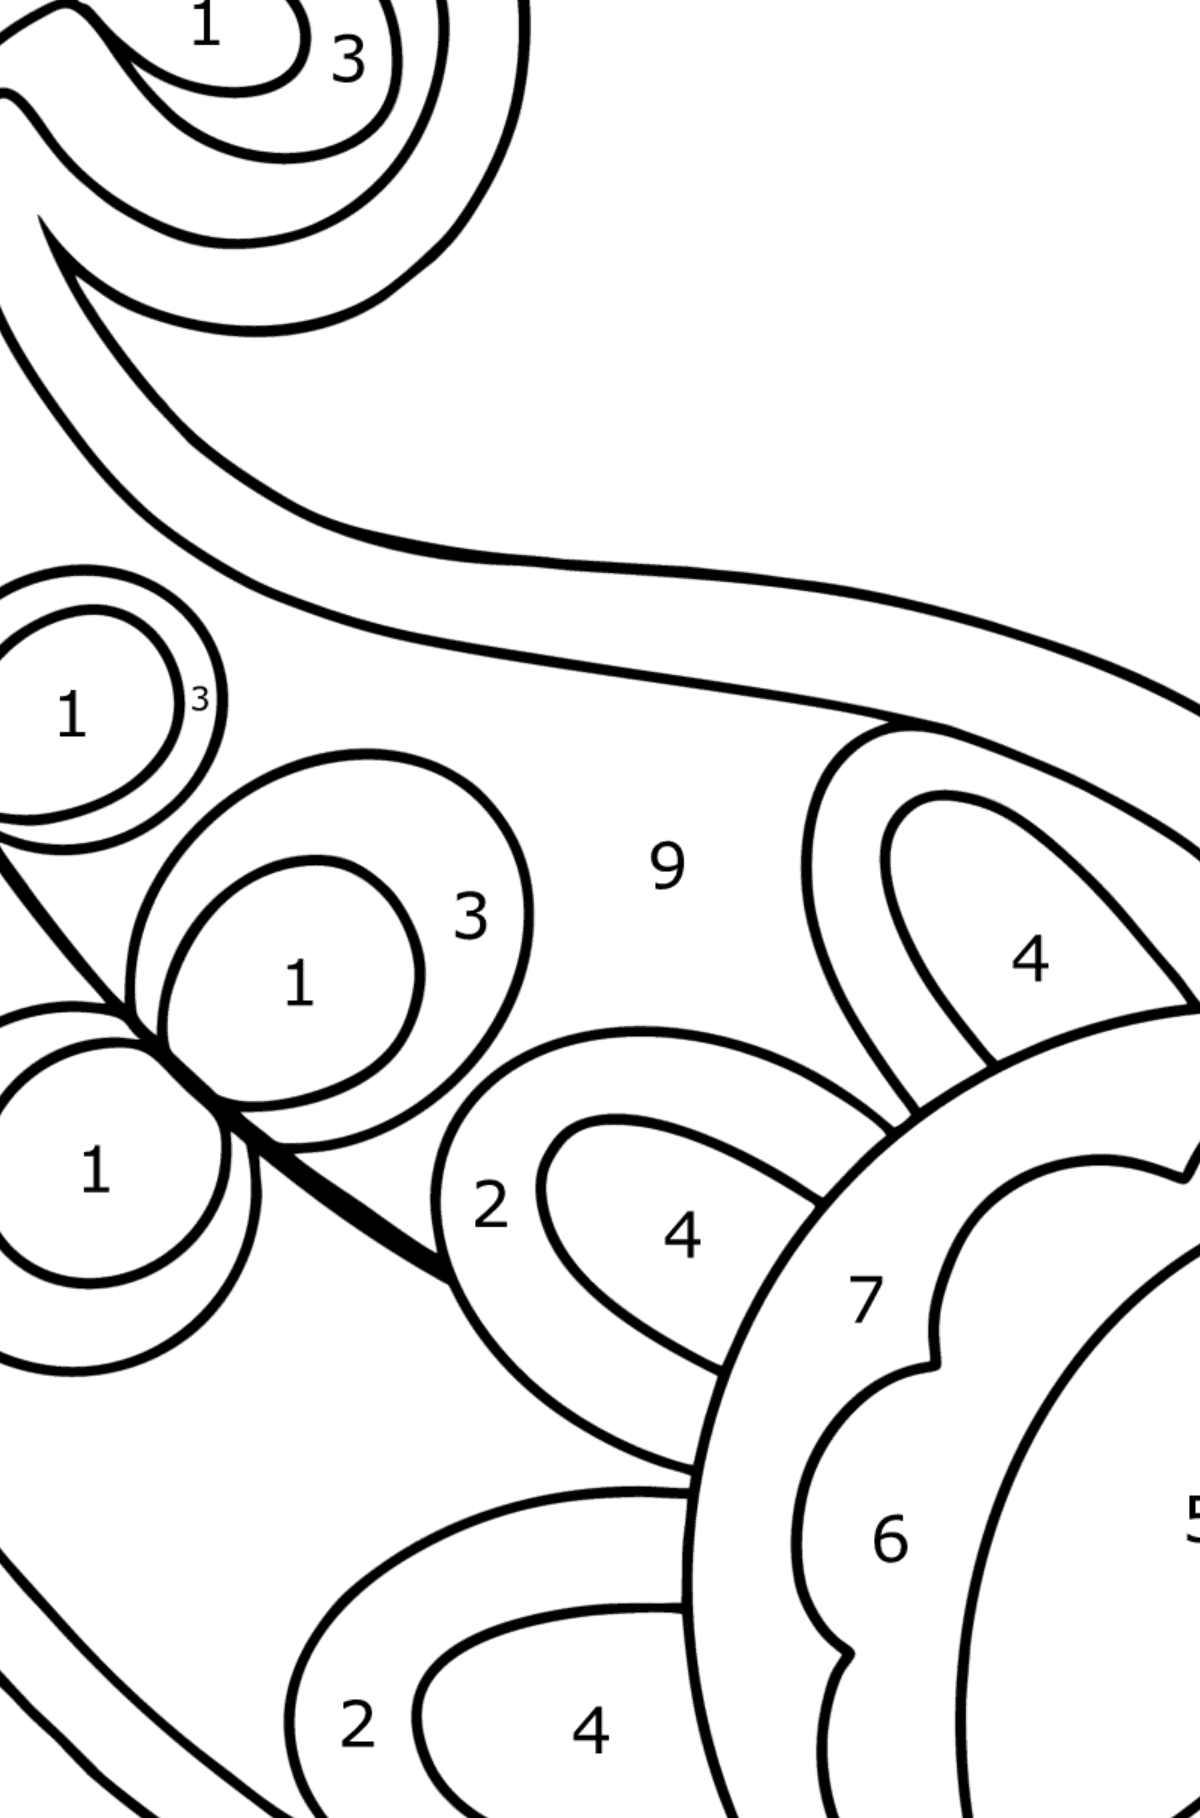 Paisley coloring page for Kids - Coloring by Numbers for Kids